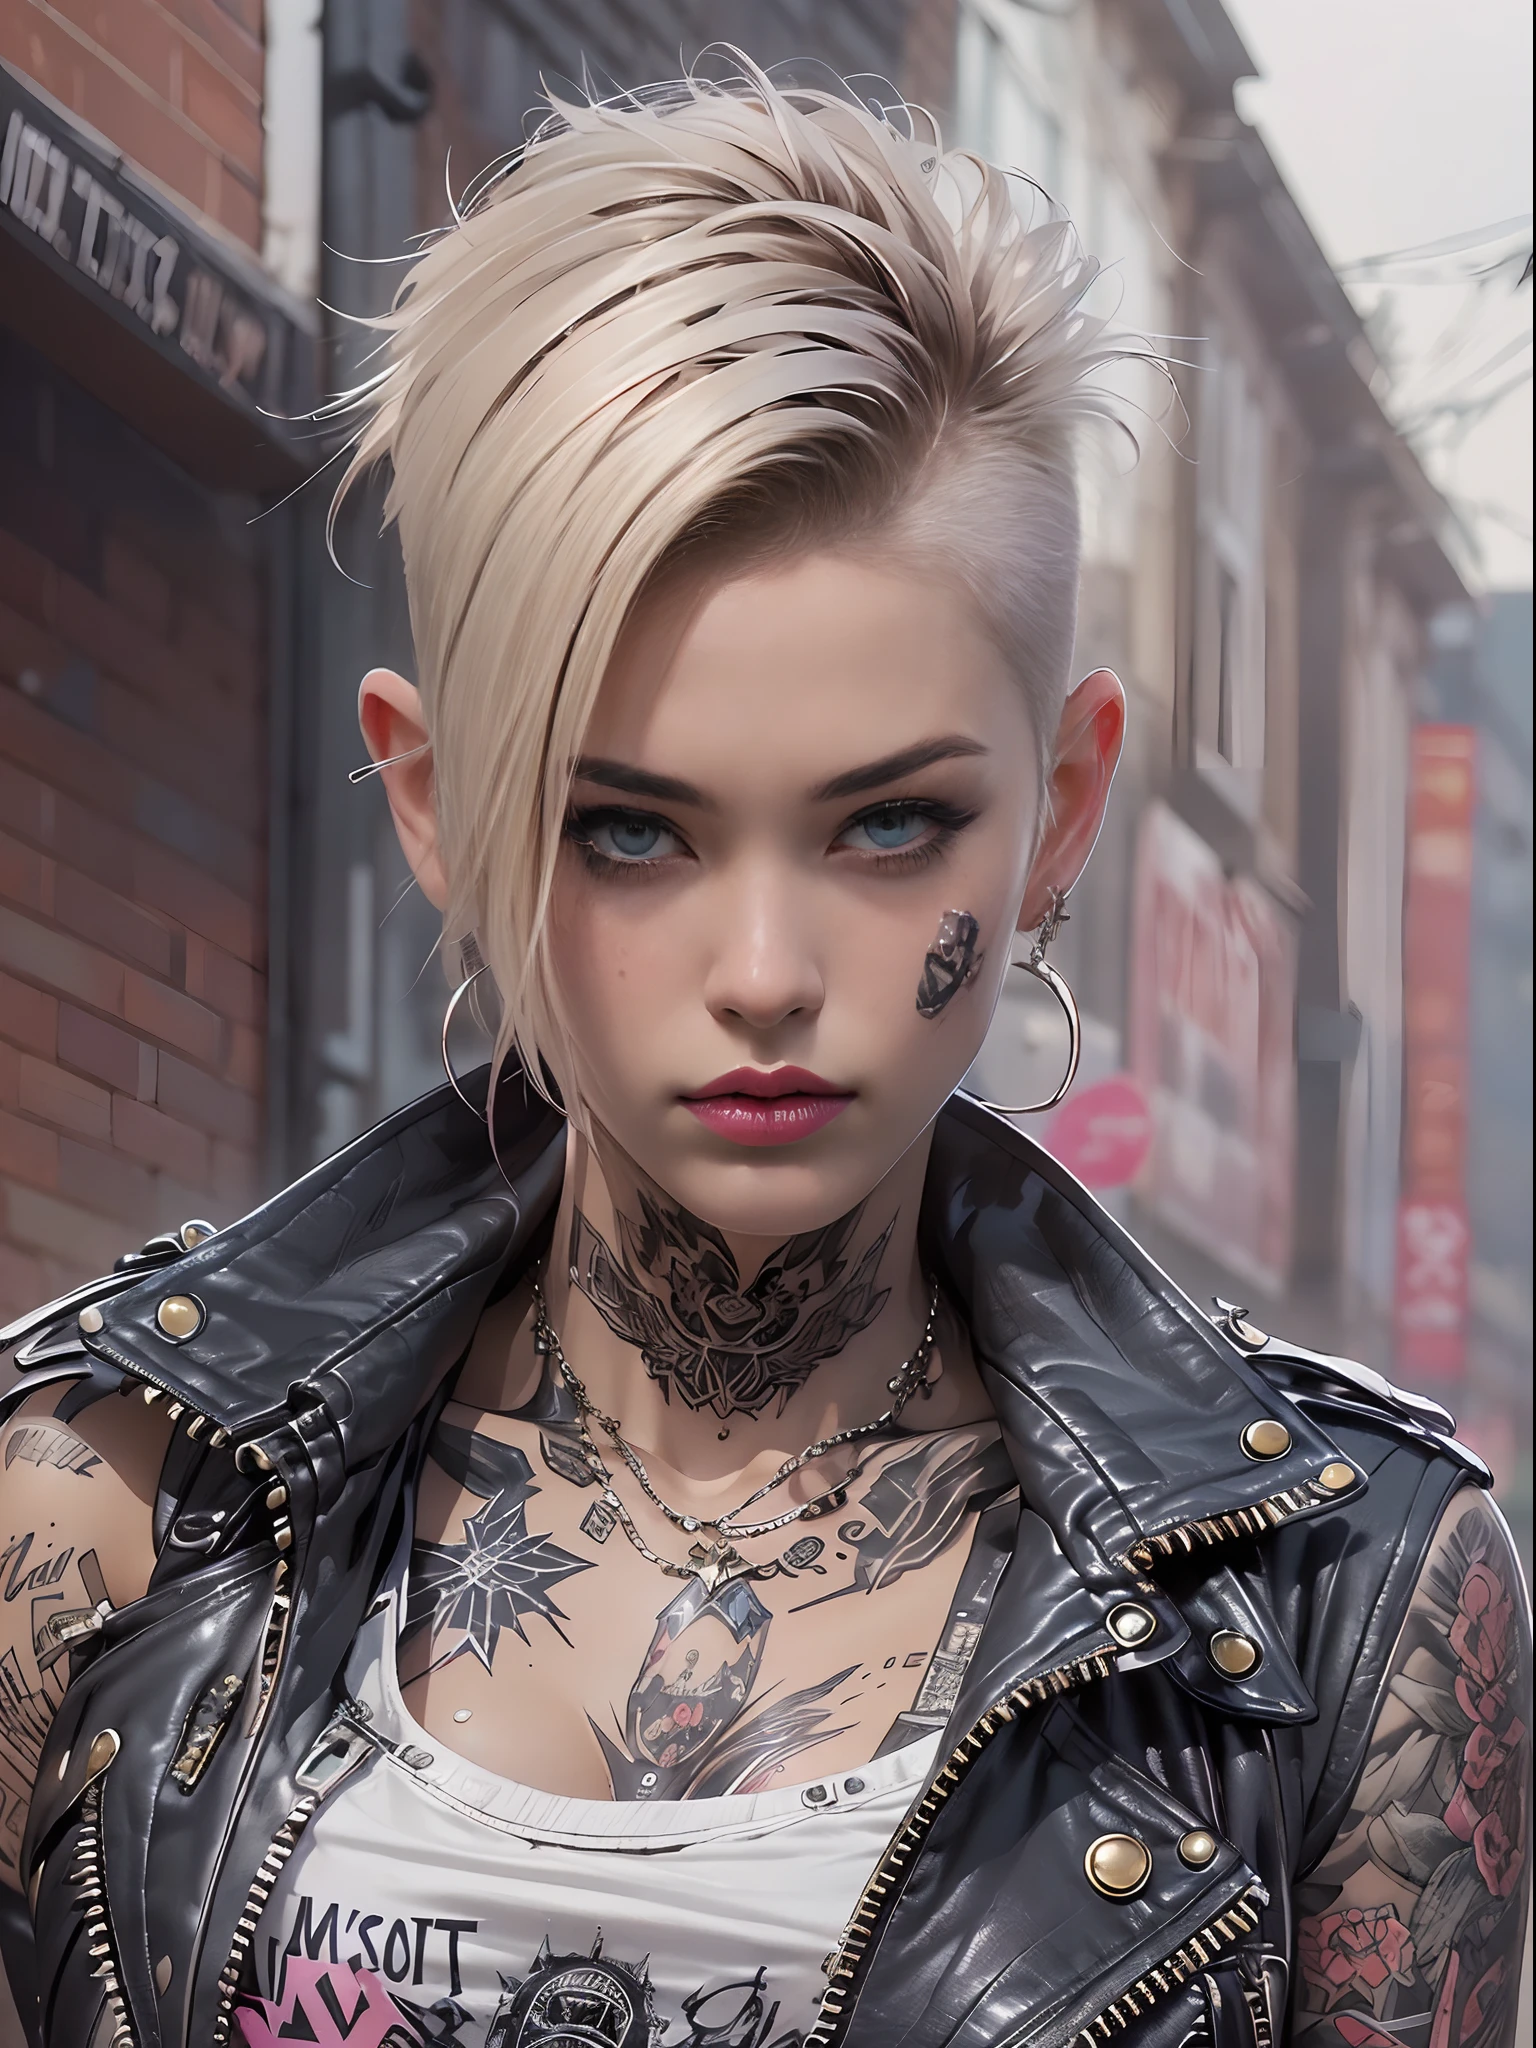 (((of the highest quality: 1.4))),(unparalleled masterpiece ever), (Ultra high definition),(Ultra-realistic 8K CG), offcial art、 (((adult body))), (((1girl in))), ((( Bob Shorthair ))), Punk girl with a perfect body, Jacket with metal spines,Beautiful and well-groomed face,,Detailed punk fashion,leather jackets, (Image from head to thigh),(( White Blonde Bob Shorthair )), Small leather panties, Simon Bisley's urban savage style,Detailed street background of London,Clean abs, Complex graphics, dark pink with white stars and gray and white stripes,,, (( Many poisonous tattoos )), piercings,